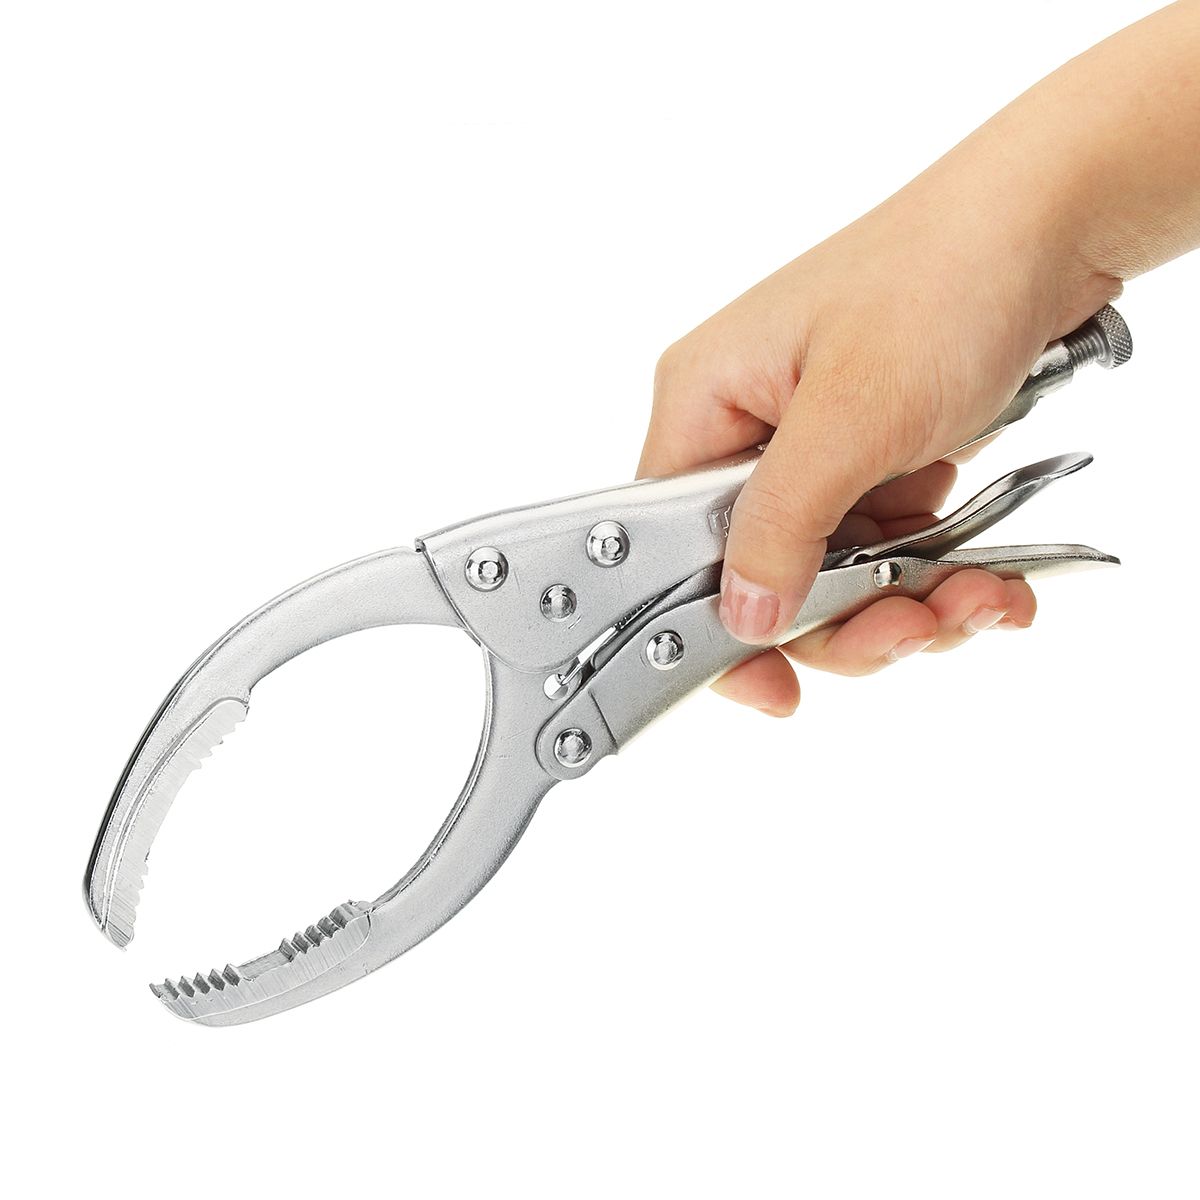 Self-Grip-Oil-Filter-Removal-Tool-Wrench-Pliers-Multi-Purpose-Hand-Remover-Tool-1446280